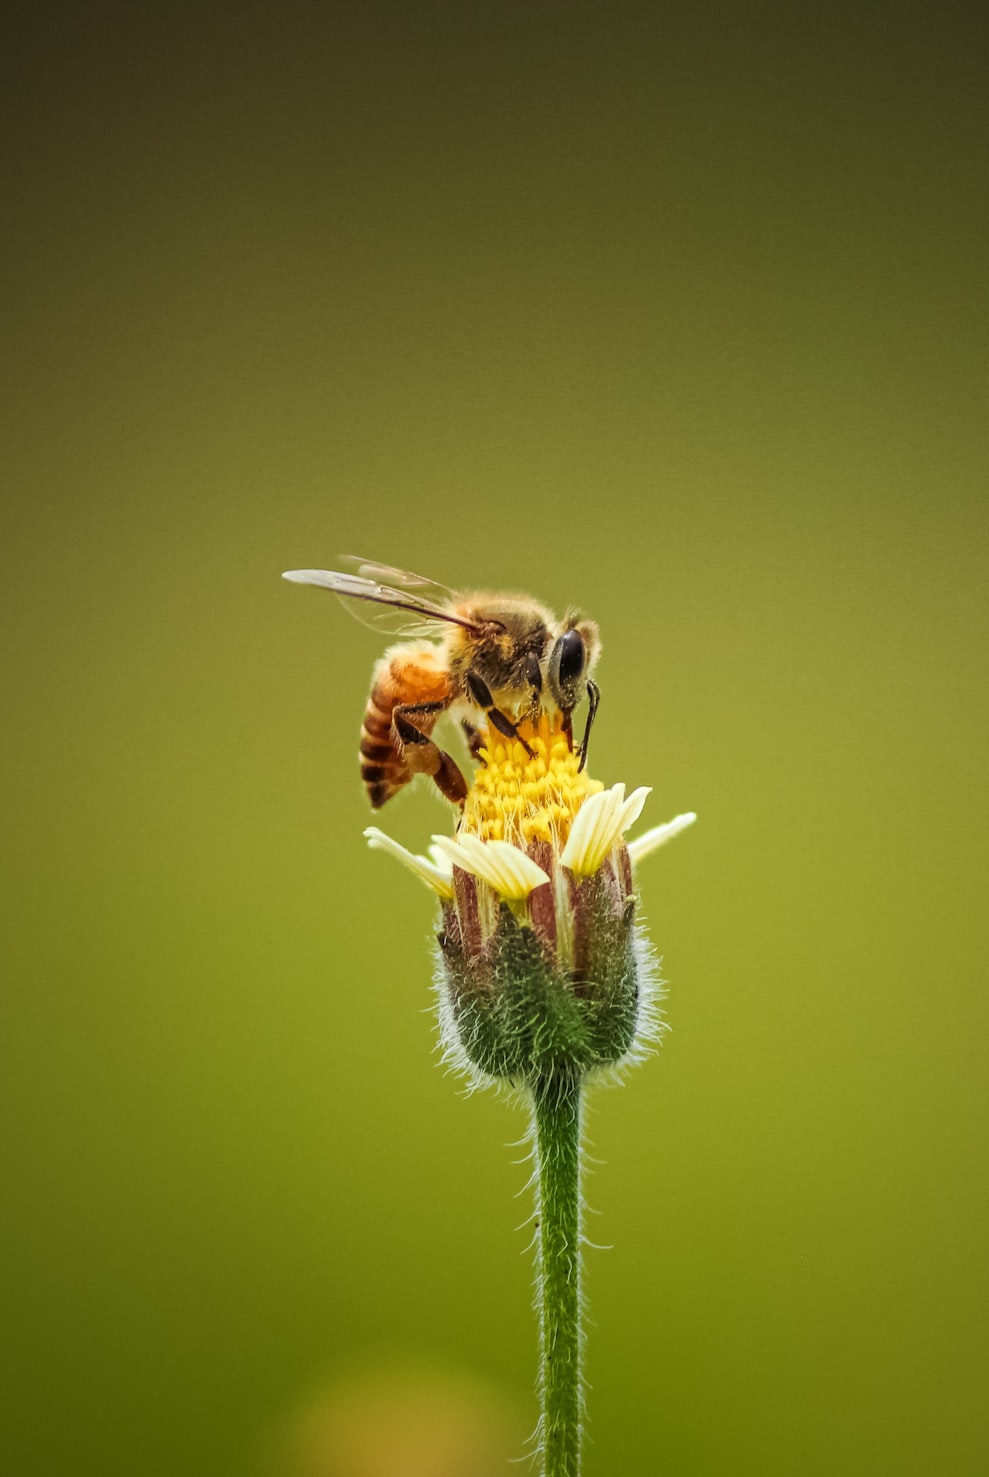 Image of a bee on a flower.